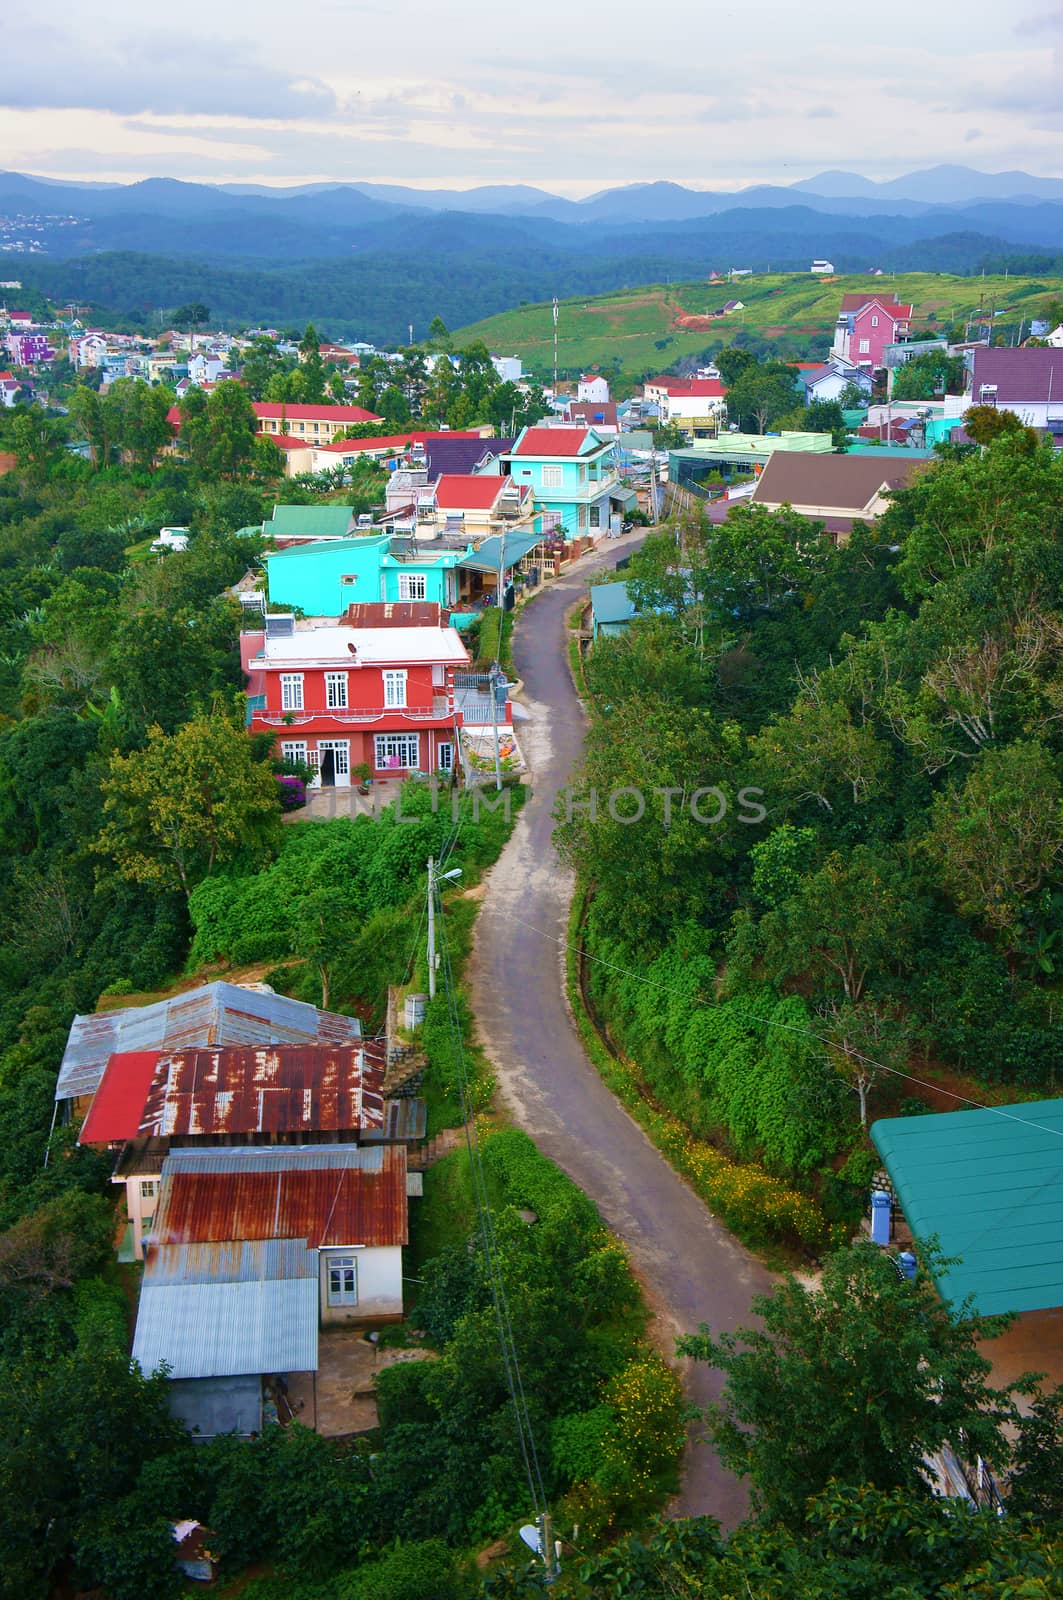 DA LAT, VIET NAM- SEPT 2: Scene of Dalat suburbs at evening, group of colorful house, country road, chain of mountain far away, countryside cover with green, fresh air, Vietnam, Sept 2, 2014